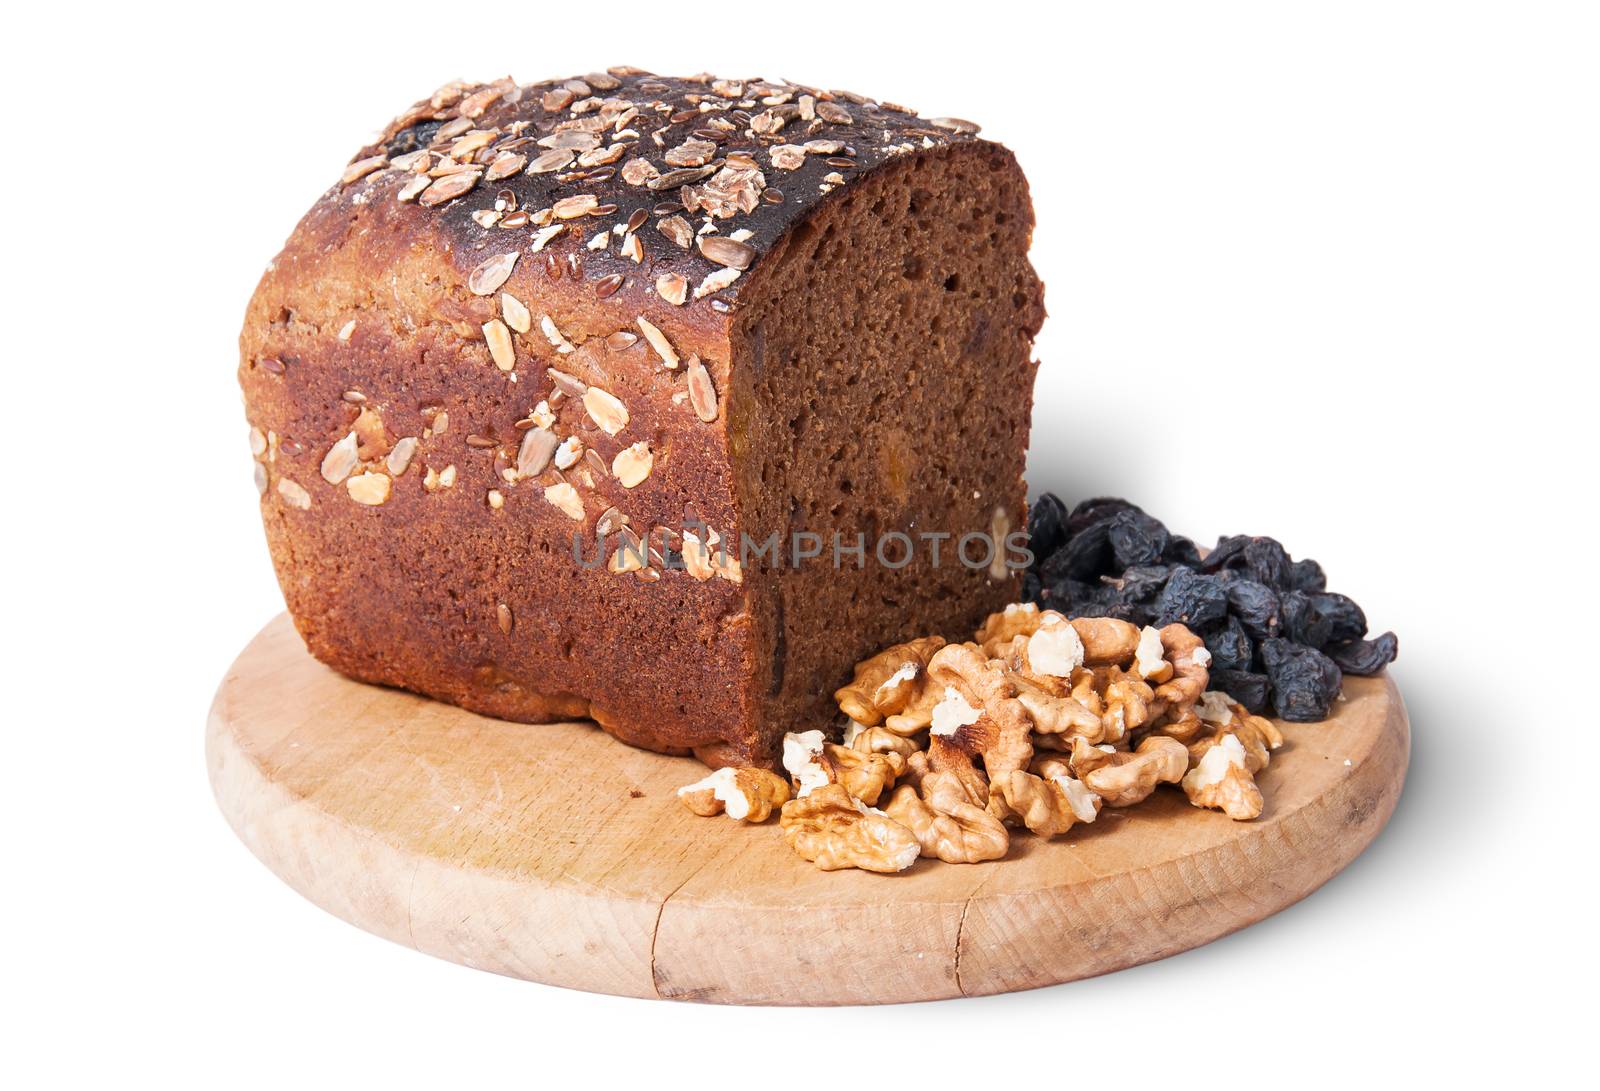 Bread with seeds on wooden board with raisins and nuts by Cipariss